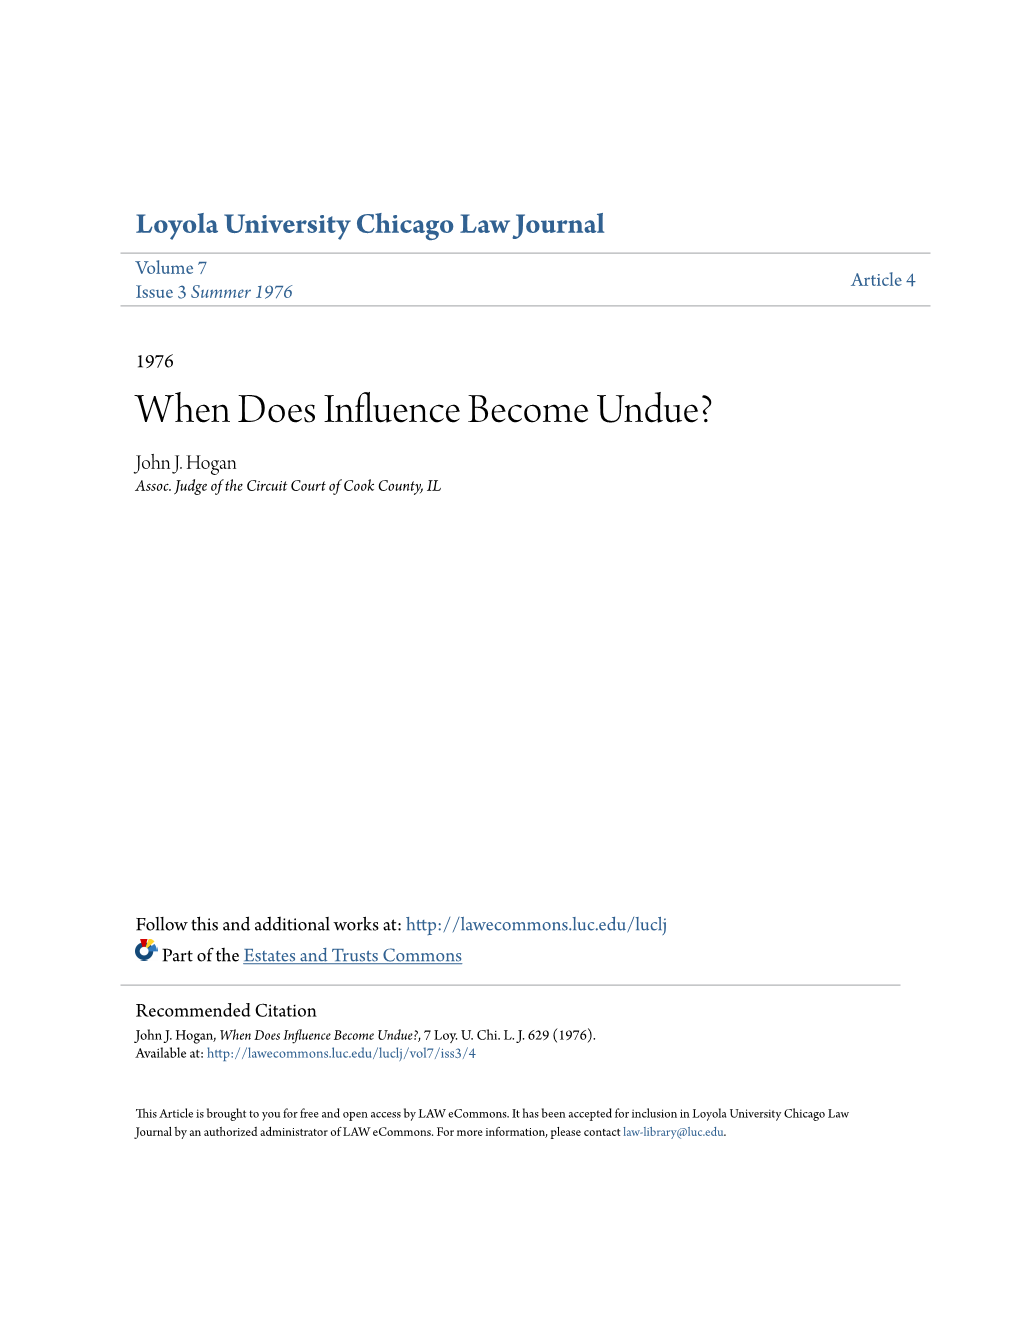 When Does Influence Become Undue? John J